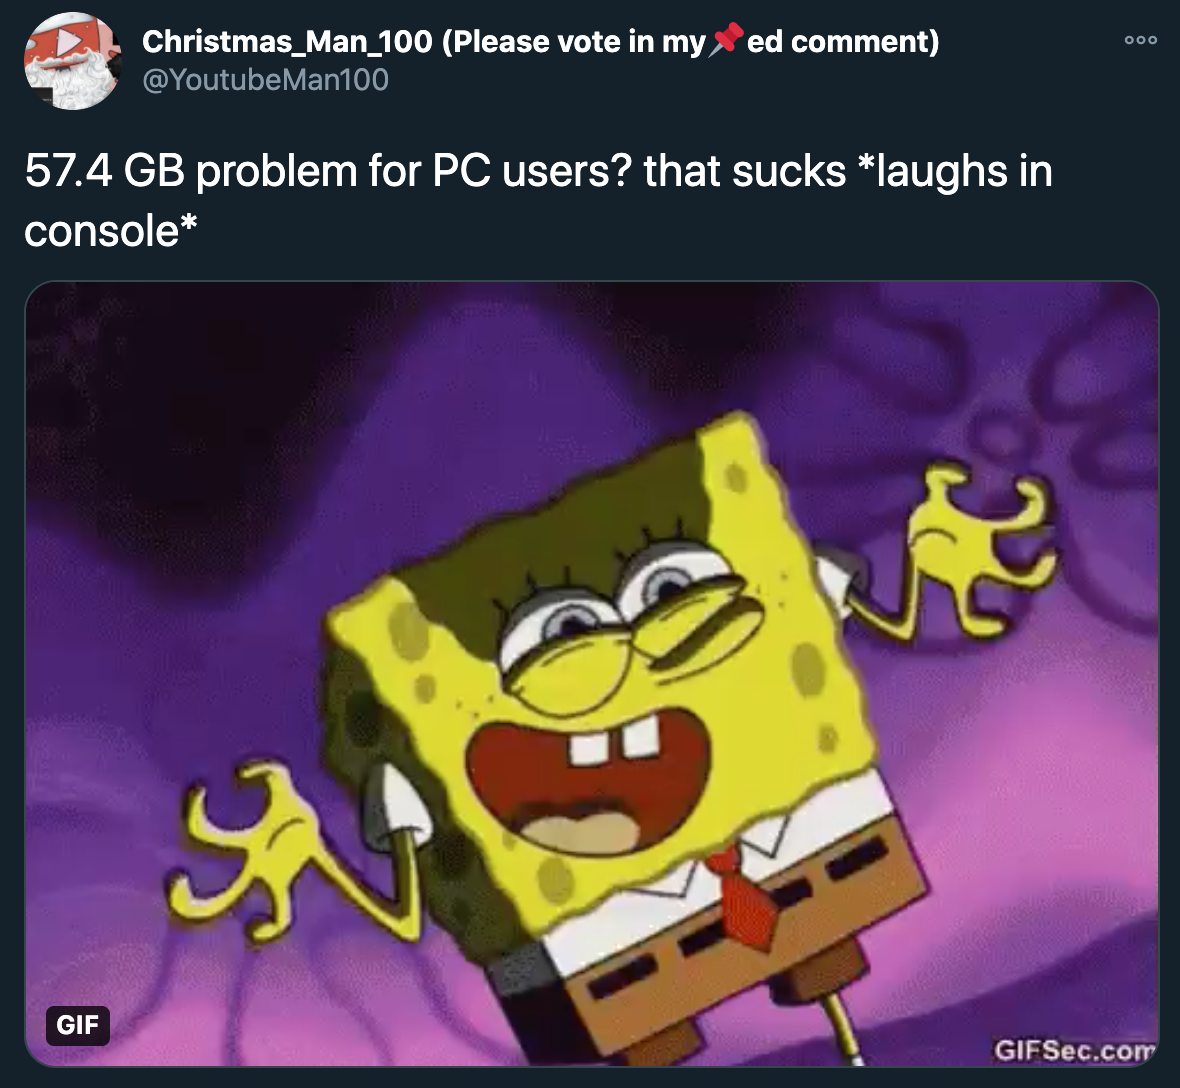 cyberpunk 2077 steam download pc gaming tweets twitter - evil laugh gif - Doo Christmas_Man_100 Please vote in my ed comment 57.4 Gb problem for Pc users that sucks laughs in console 3 Gif Gif Sec.com